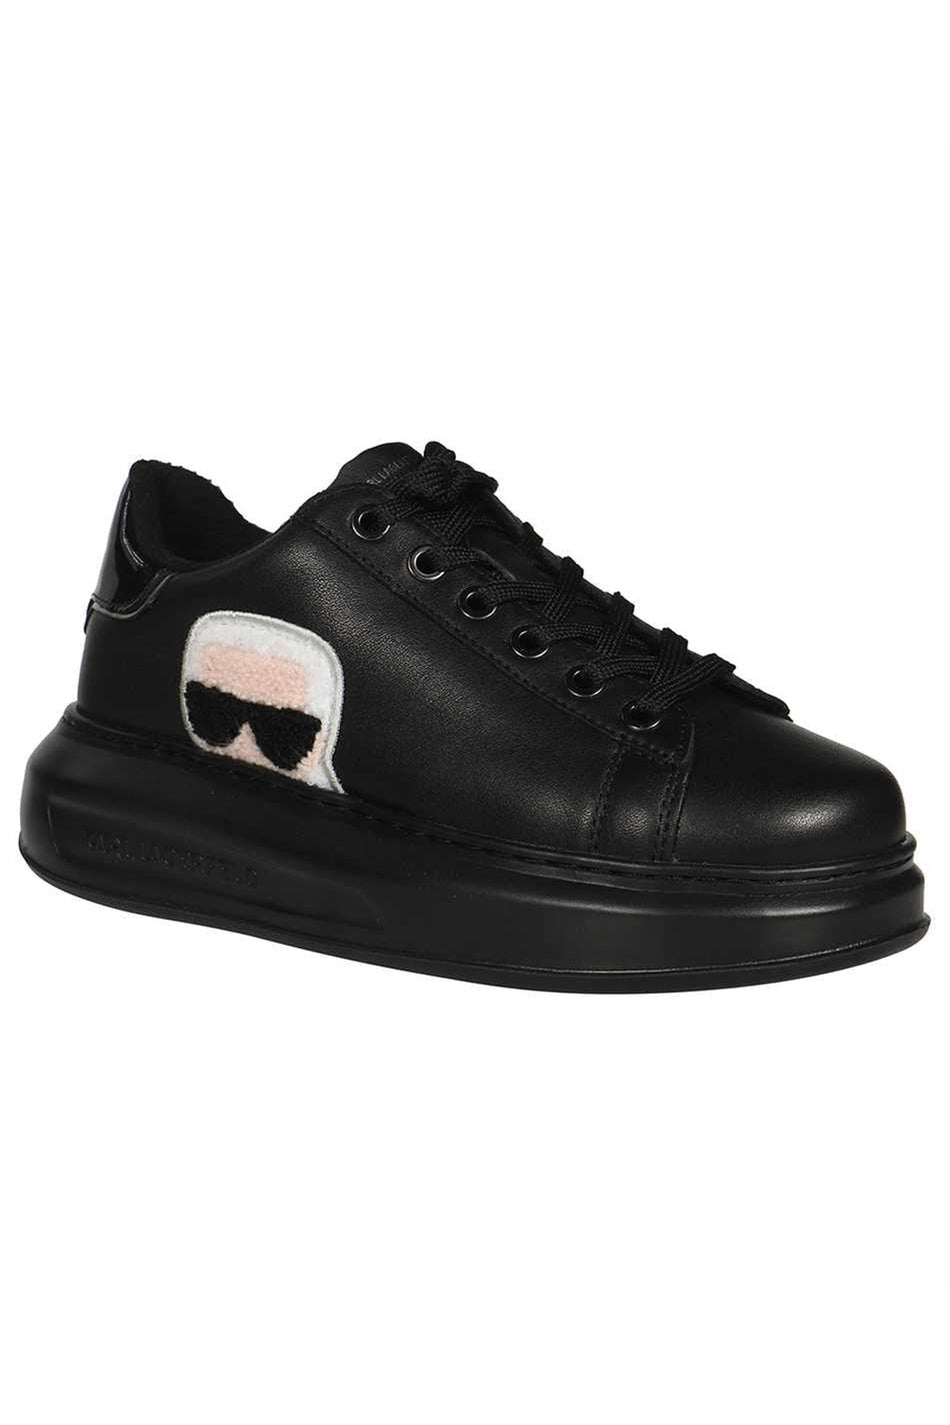 Low-top sneakers-Karl Lagerfeld-OUTLET-SALE-ARCHIVIST